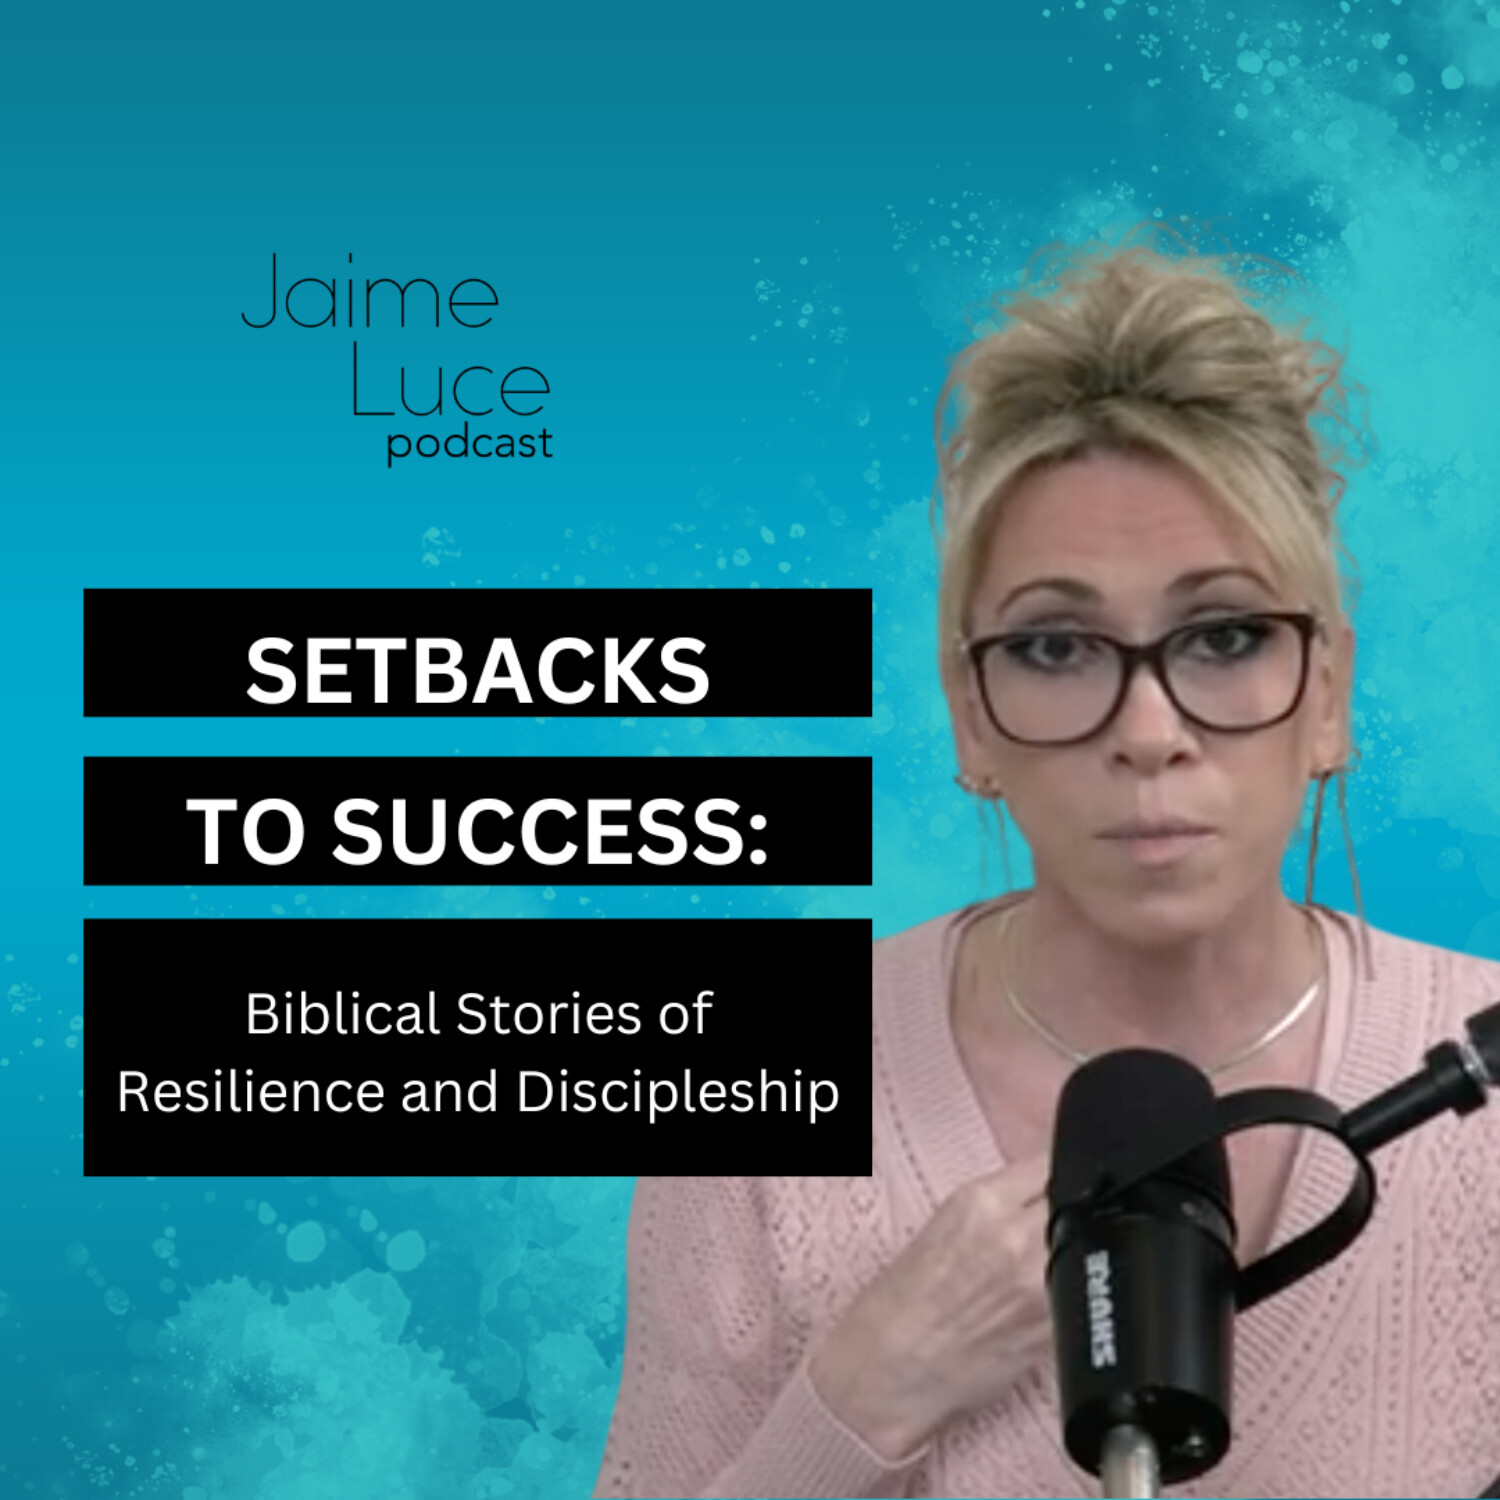 Setbacks to Success: Biblical Stories of Resilience and Discipleship